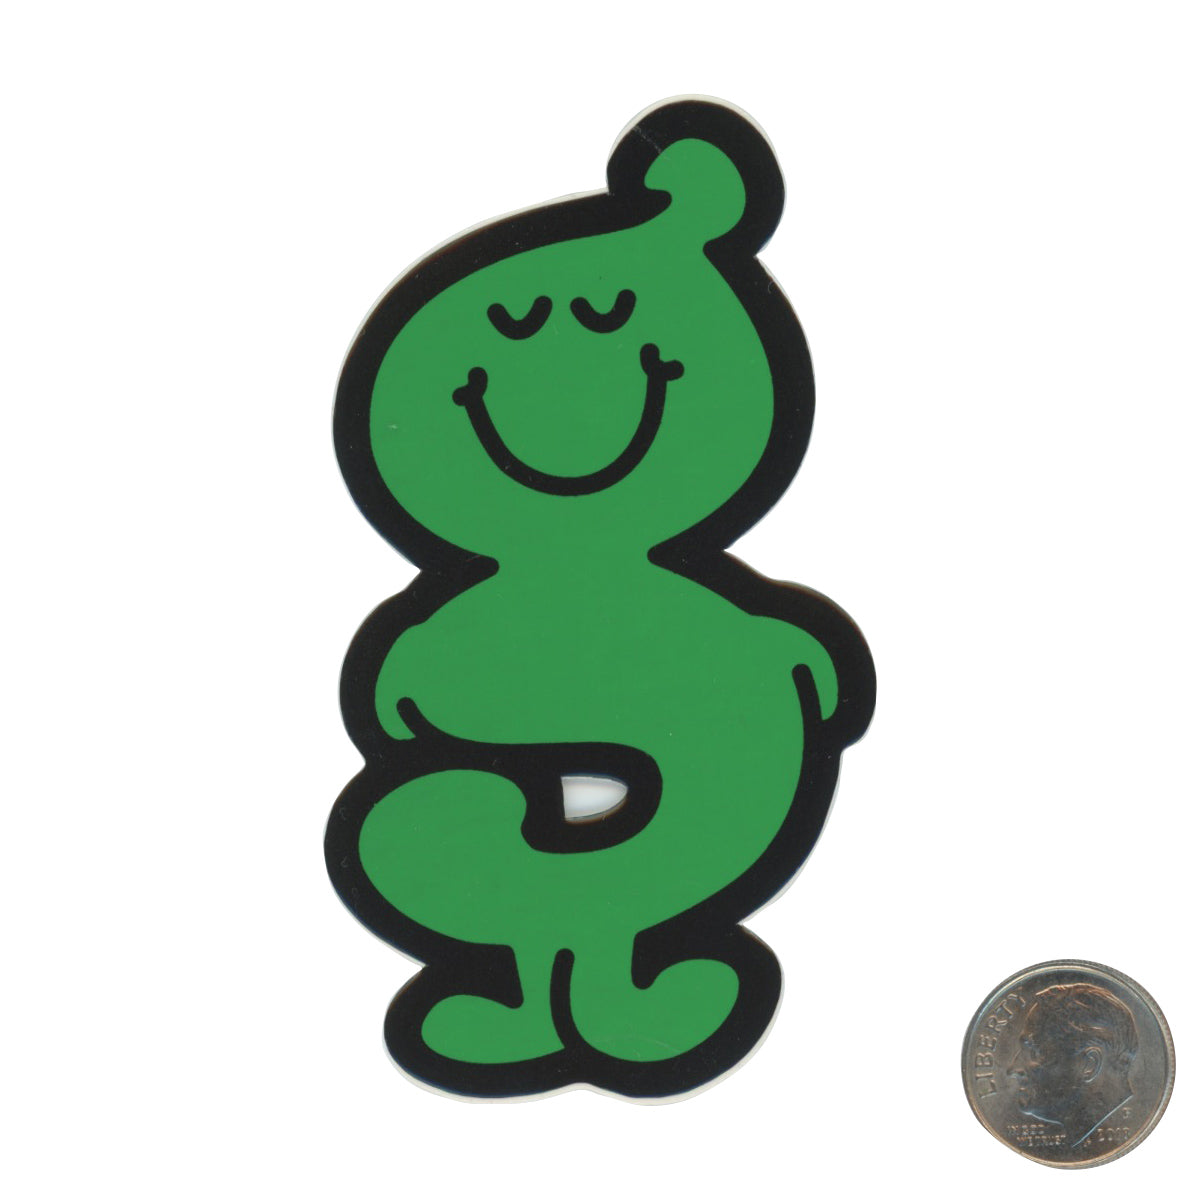 GOODENOUGH "G" Large Green Sticker with dime